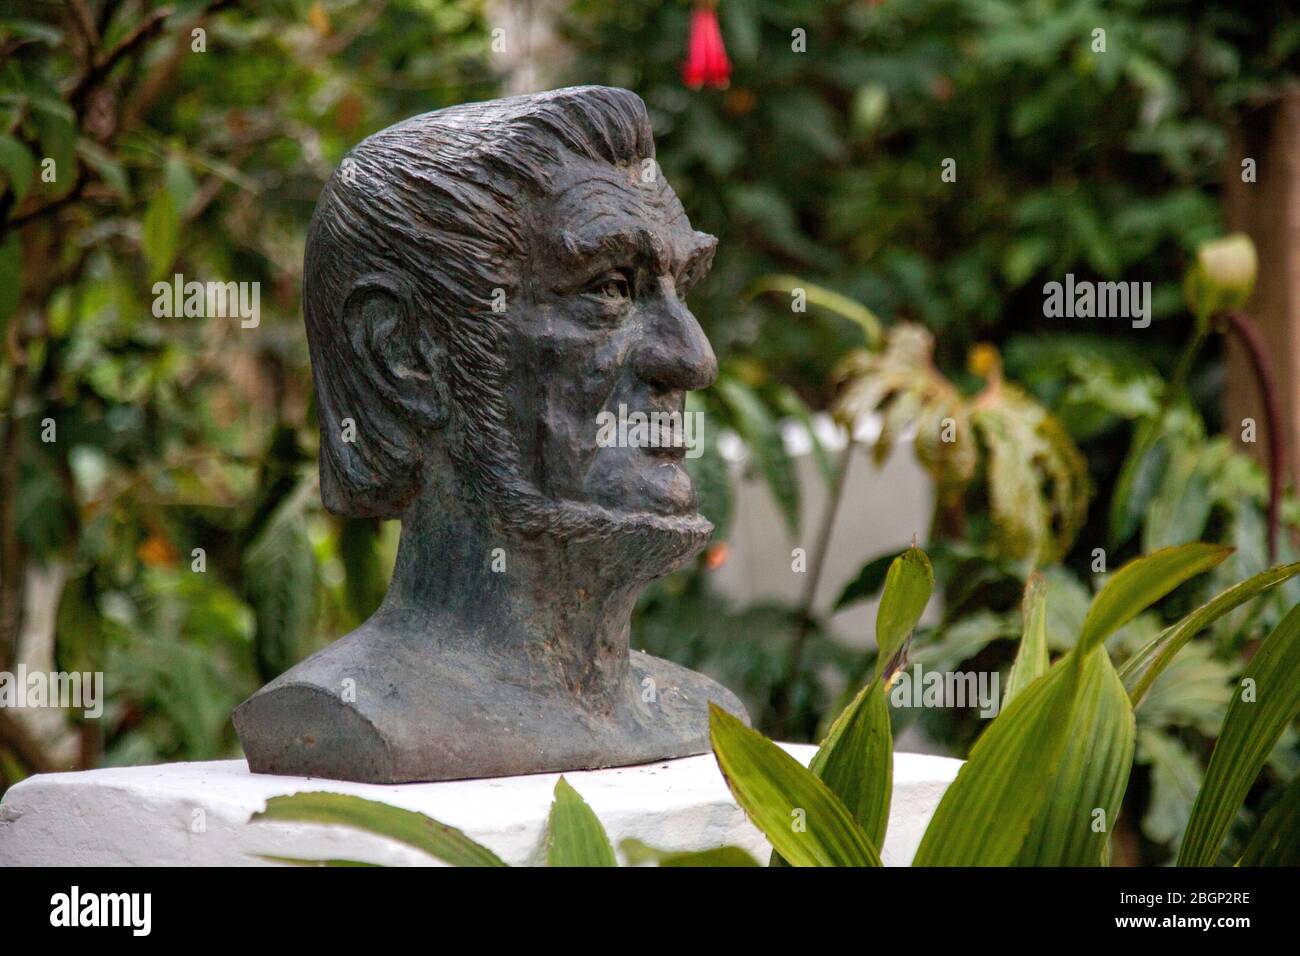 Leopoldo Richter (1896-1984), famous German artist and entomologist, bust sculpture at his home garden in Bogota, Colombia, South American. Stock Photo